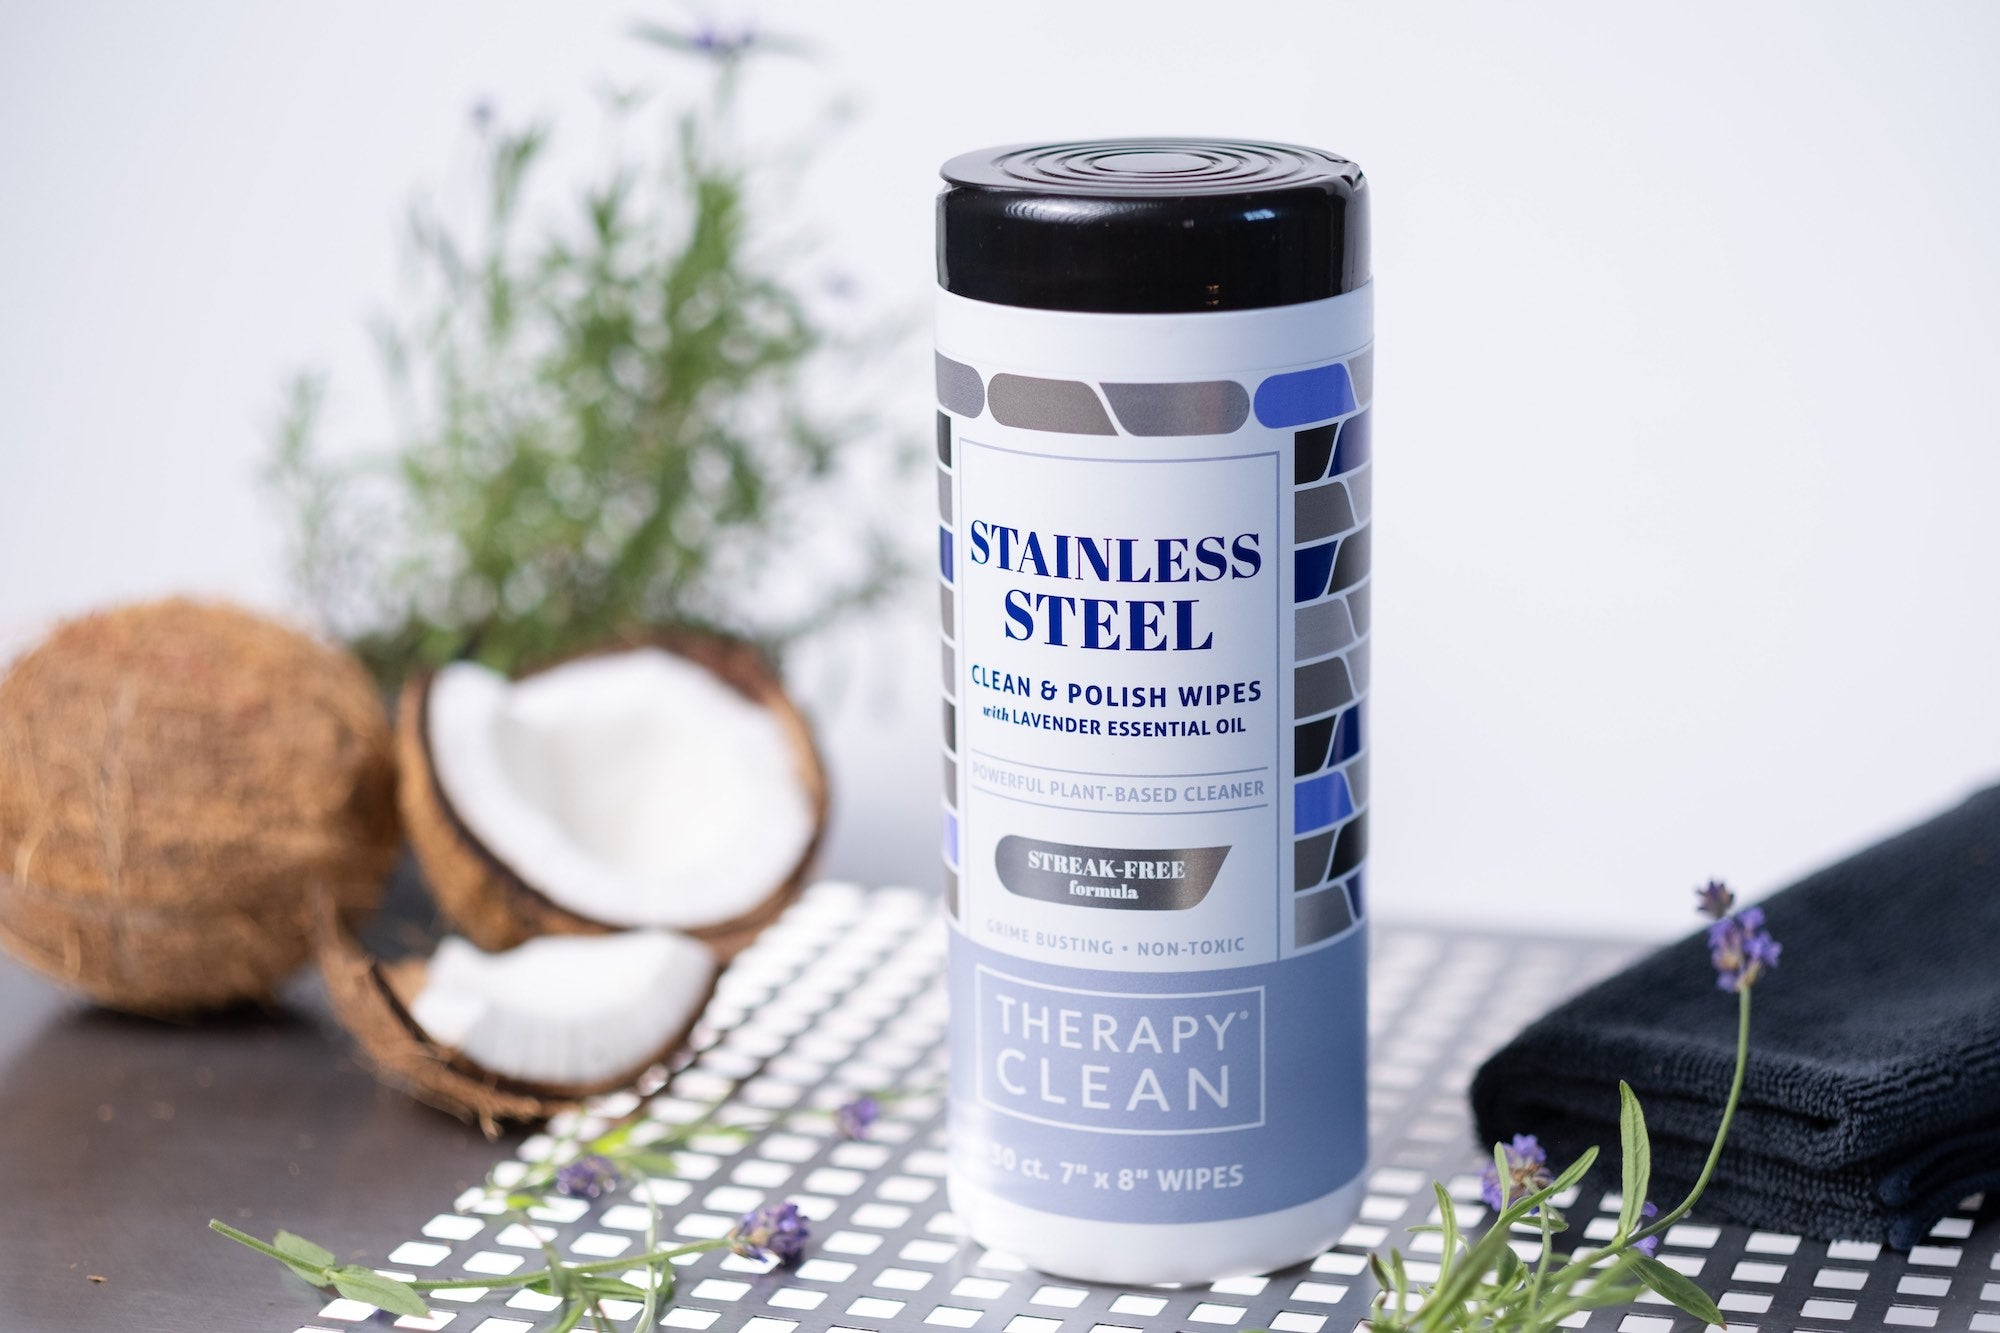 Stainless Steel Clean & Polish Wipes